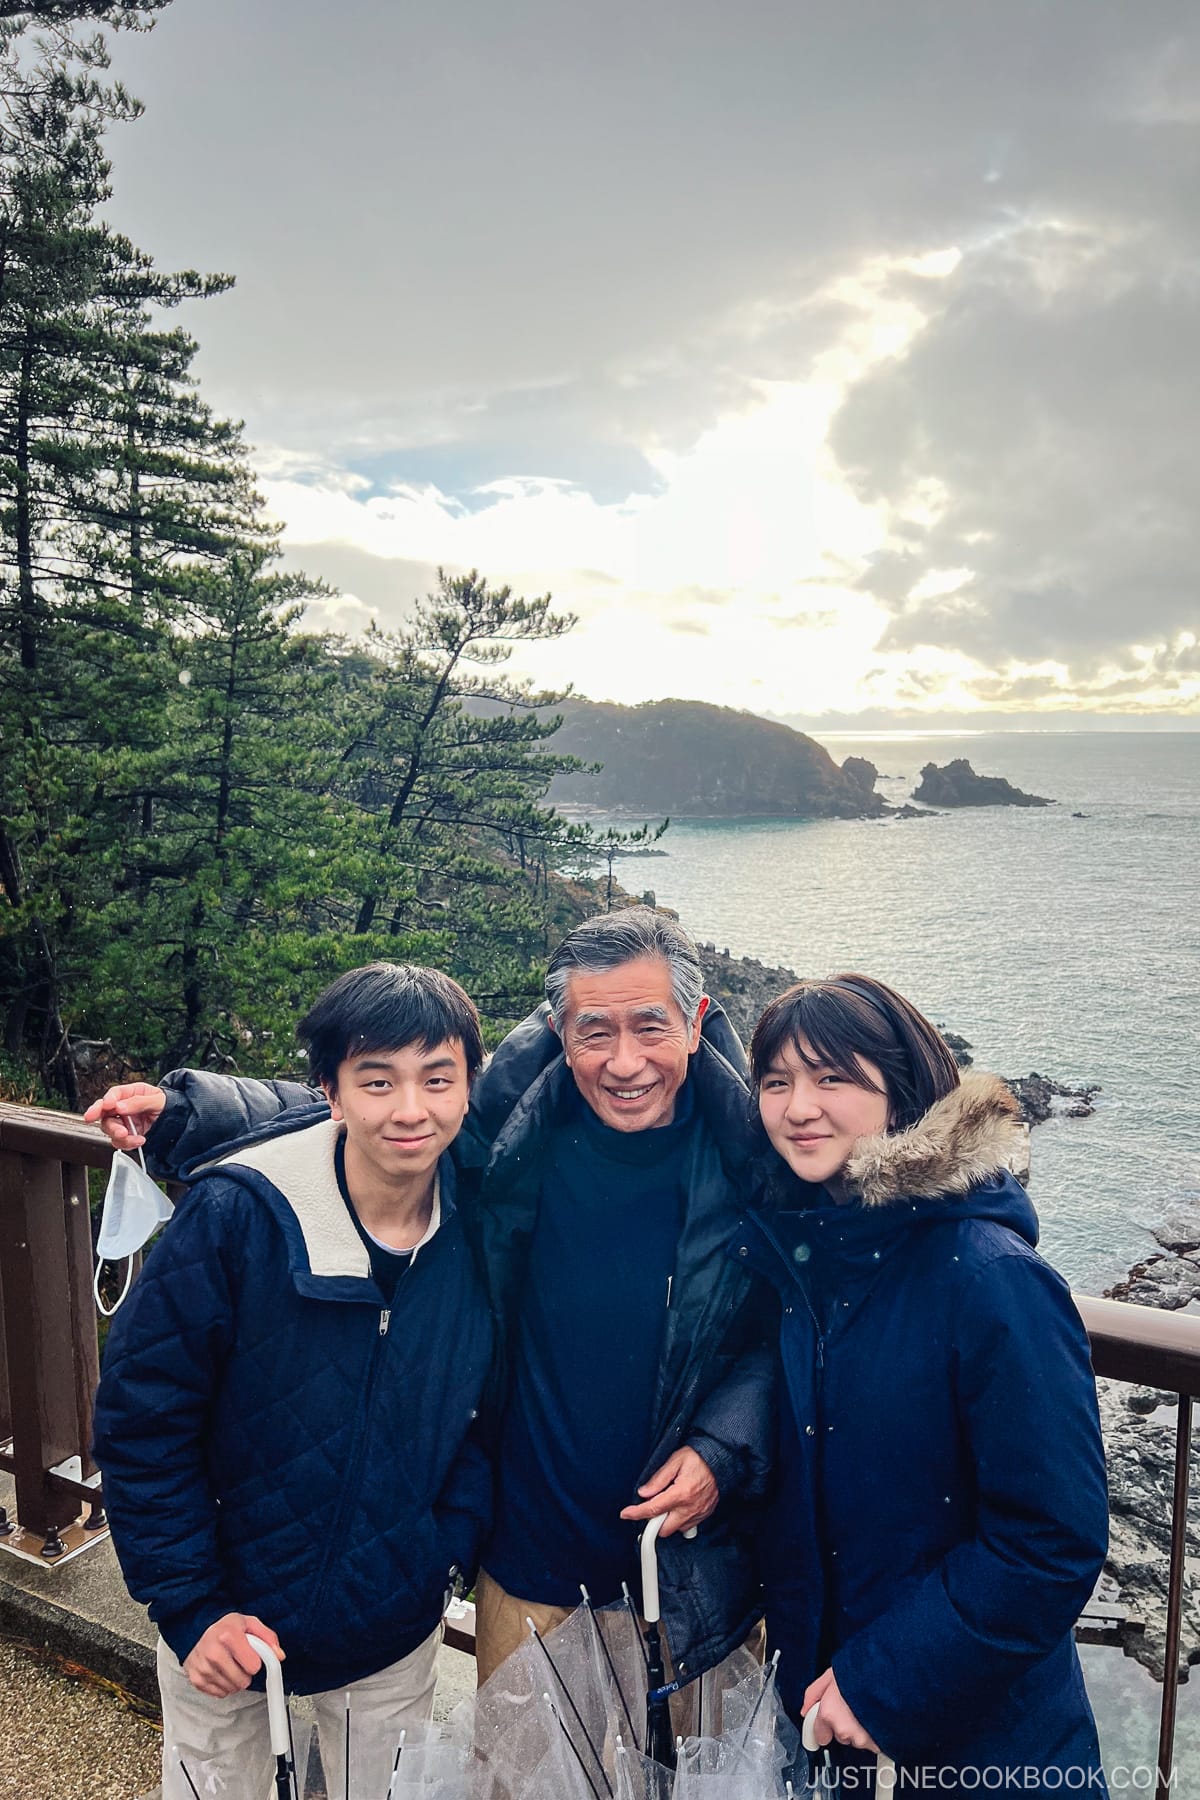 two teen with an older man standing next to ocean